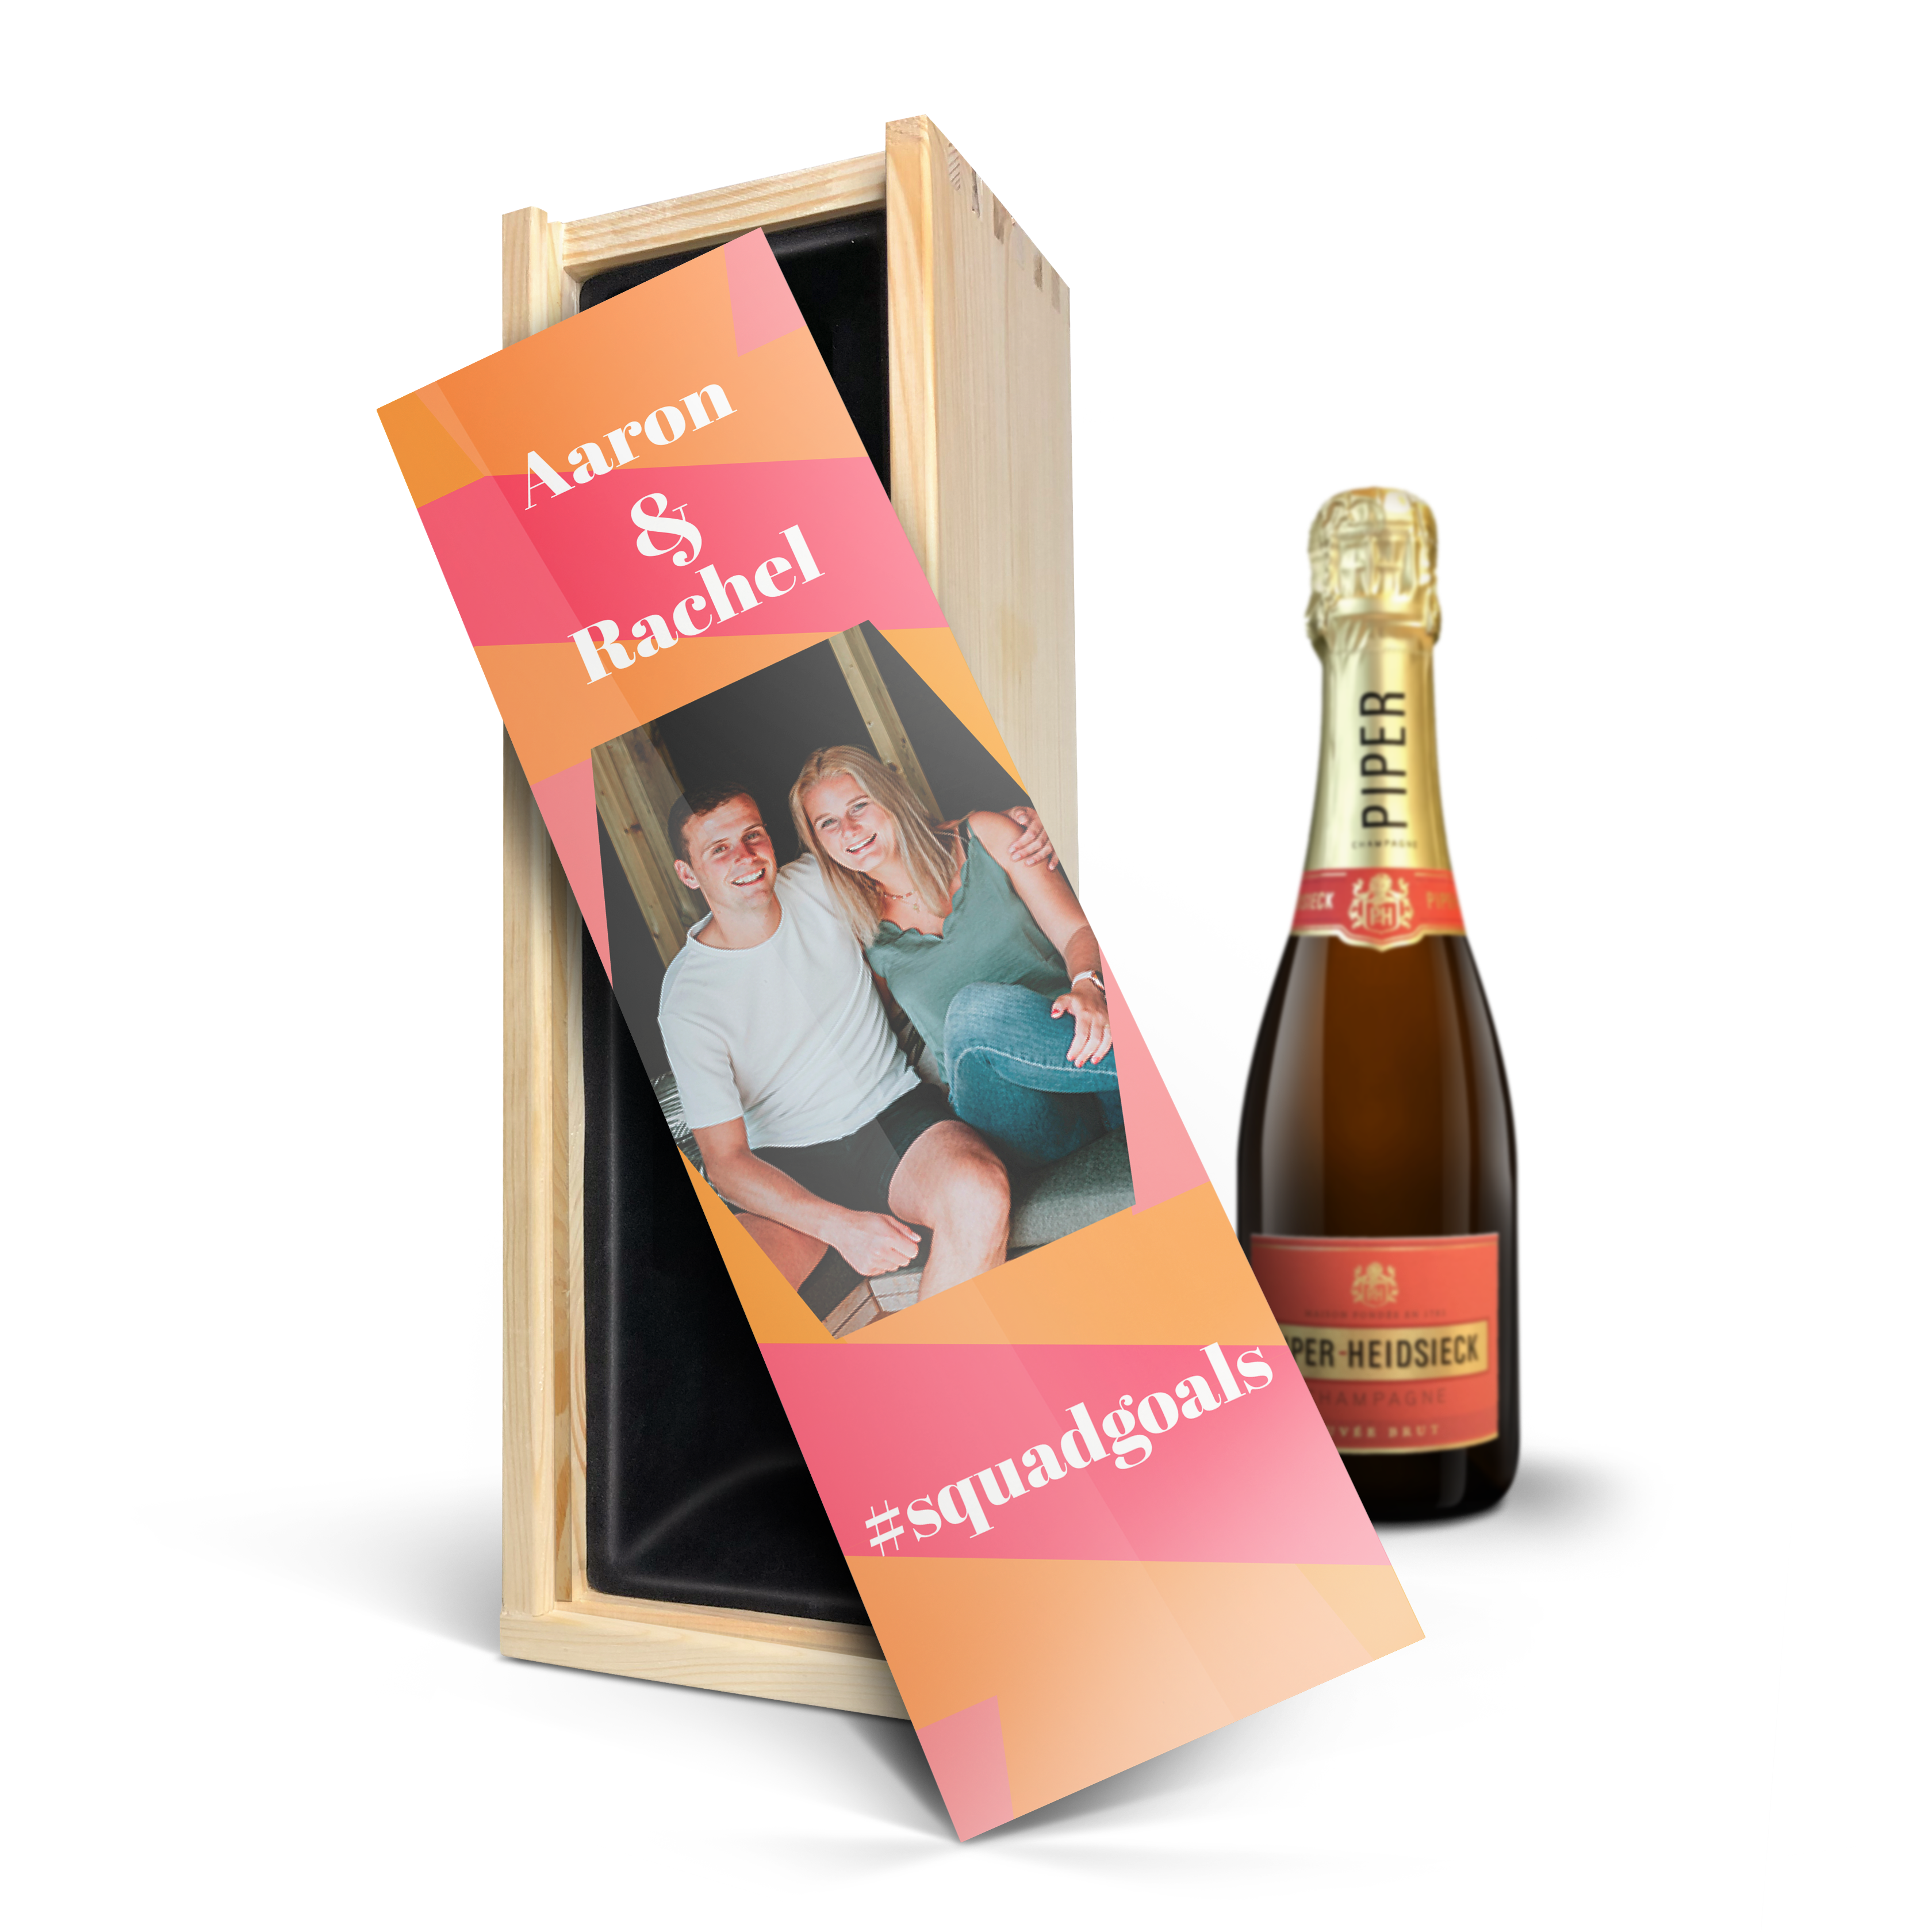 Personalised champagne gift - Piper Heidsieck Brut (375ml) - Printed wooden case